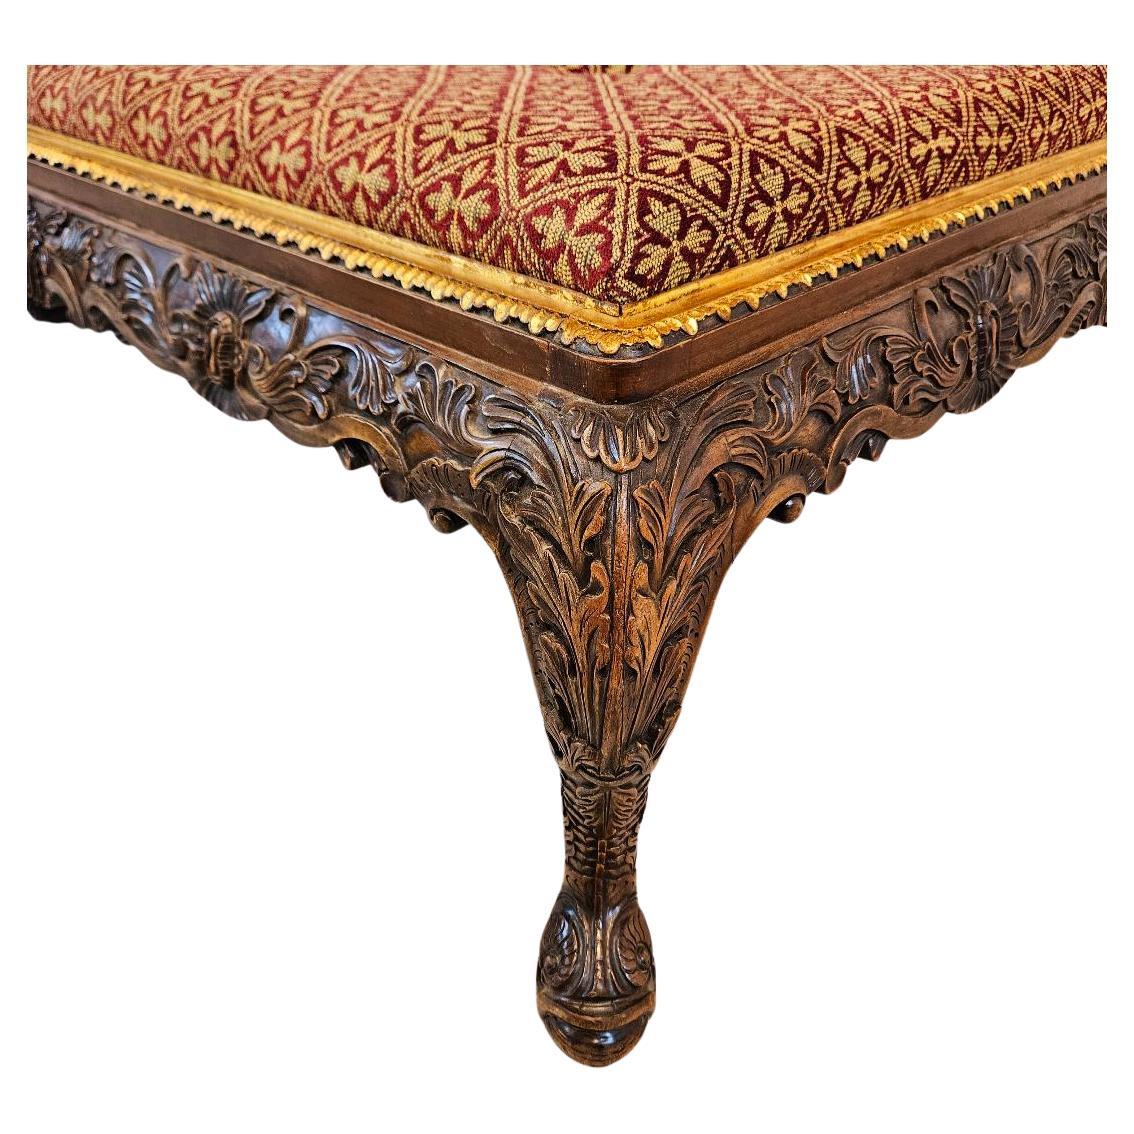 Chippendale Style Large Carved Upholstered Cocktail Ottoman.  A fine example of a large carved mahogany ottoman with traditional upholstered surface.  Very useful as an ottoman to put your feet up or as a cocktail ottoman, coffee table or the centre